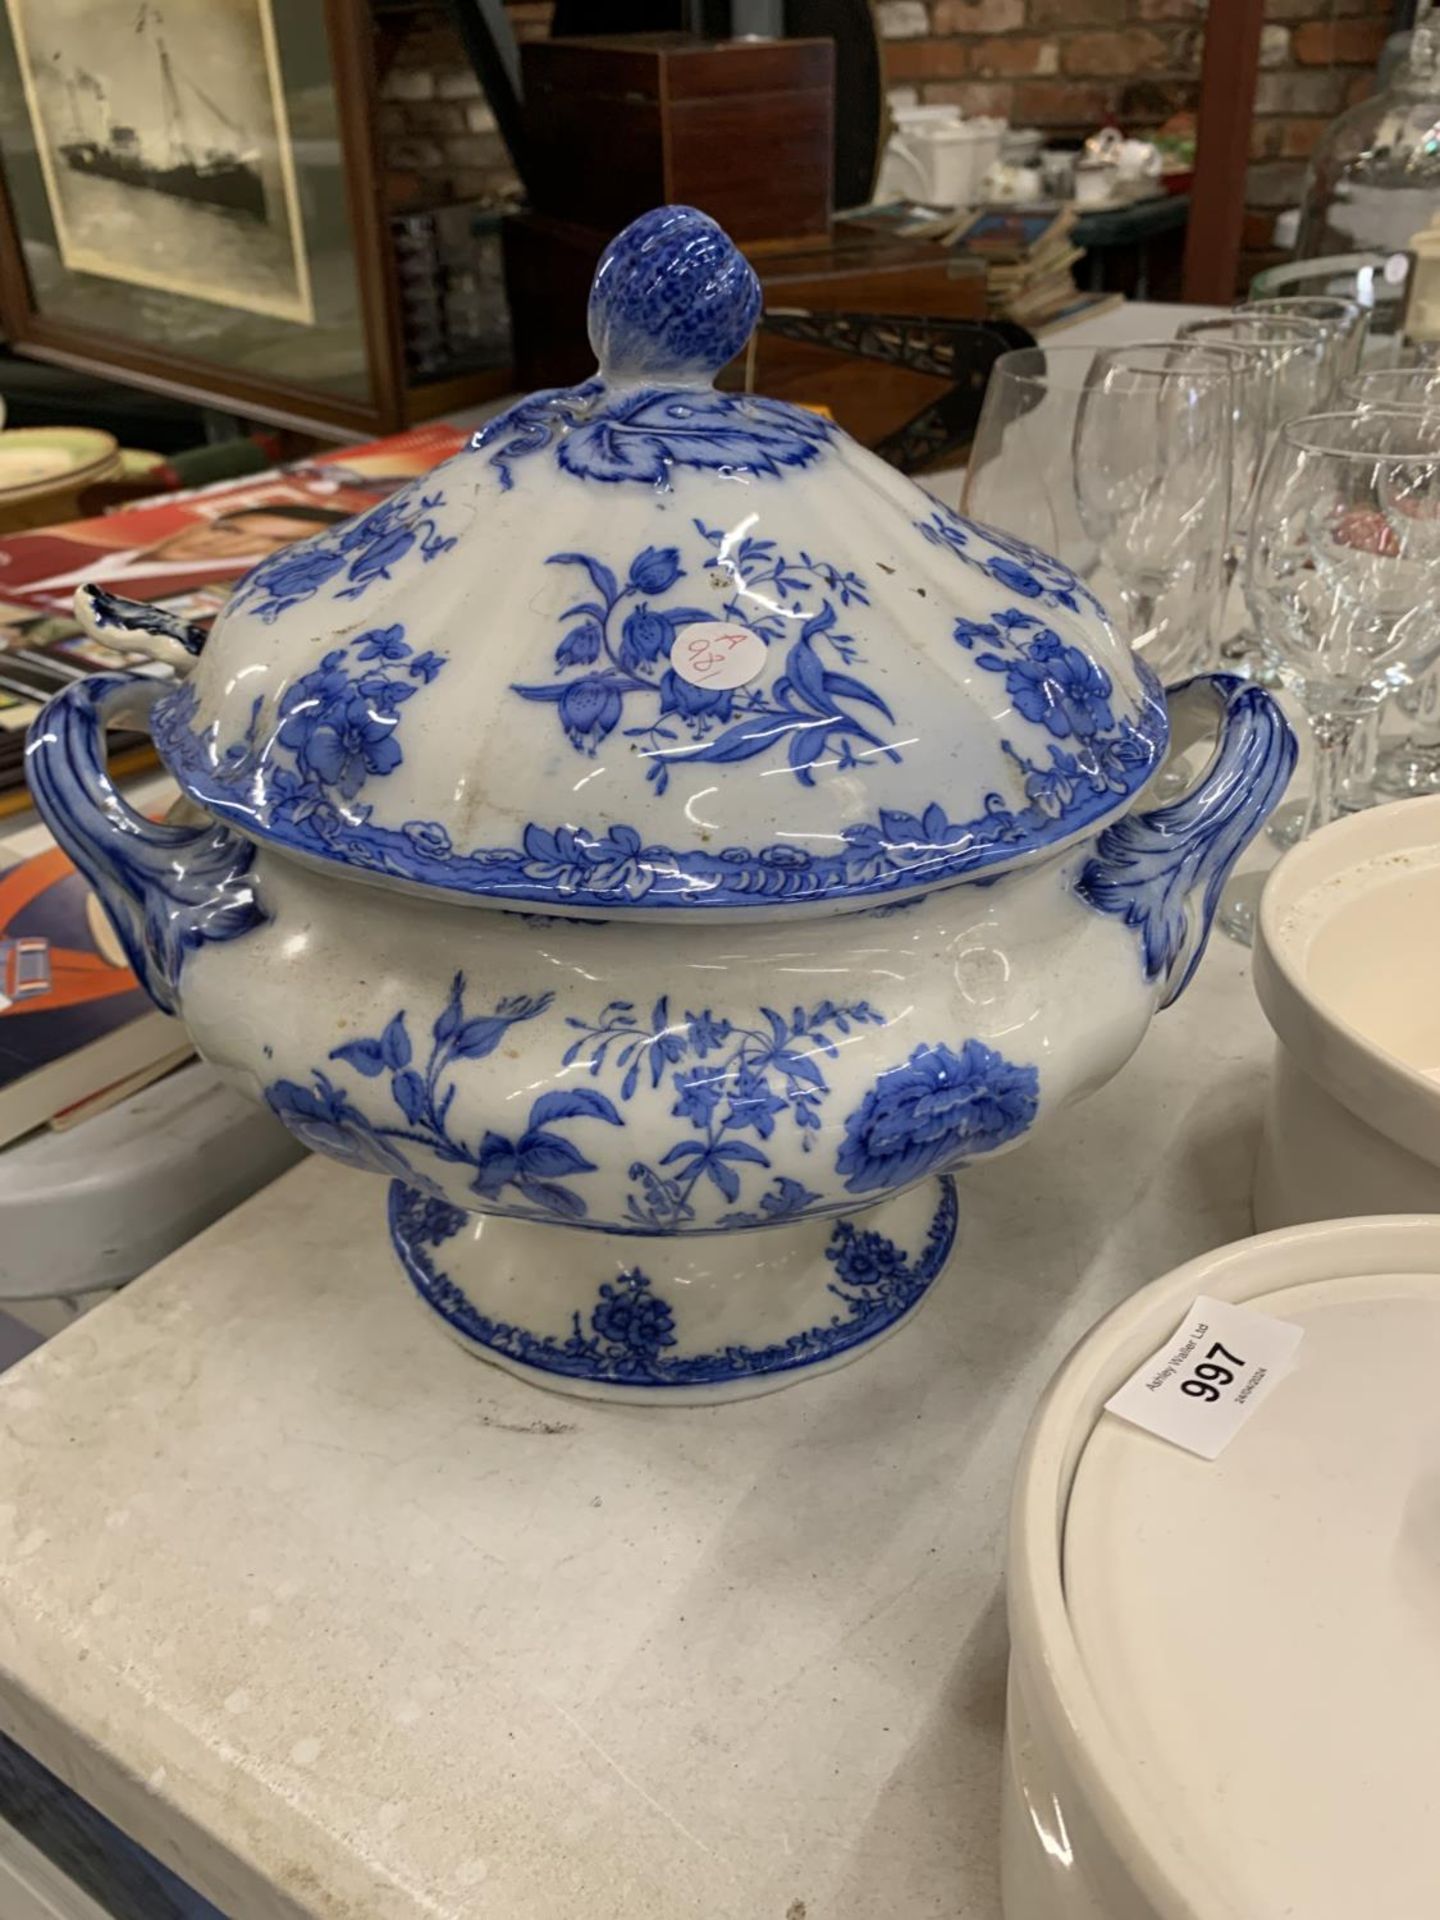 A LARGE VINTAGE 'VENETIAN' LIDDED TUREEN, PLATE AND LADEL, PLUS TWO LARGE SERVING DISHES - Image 2 of 3